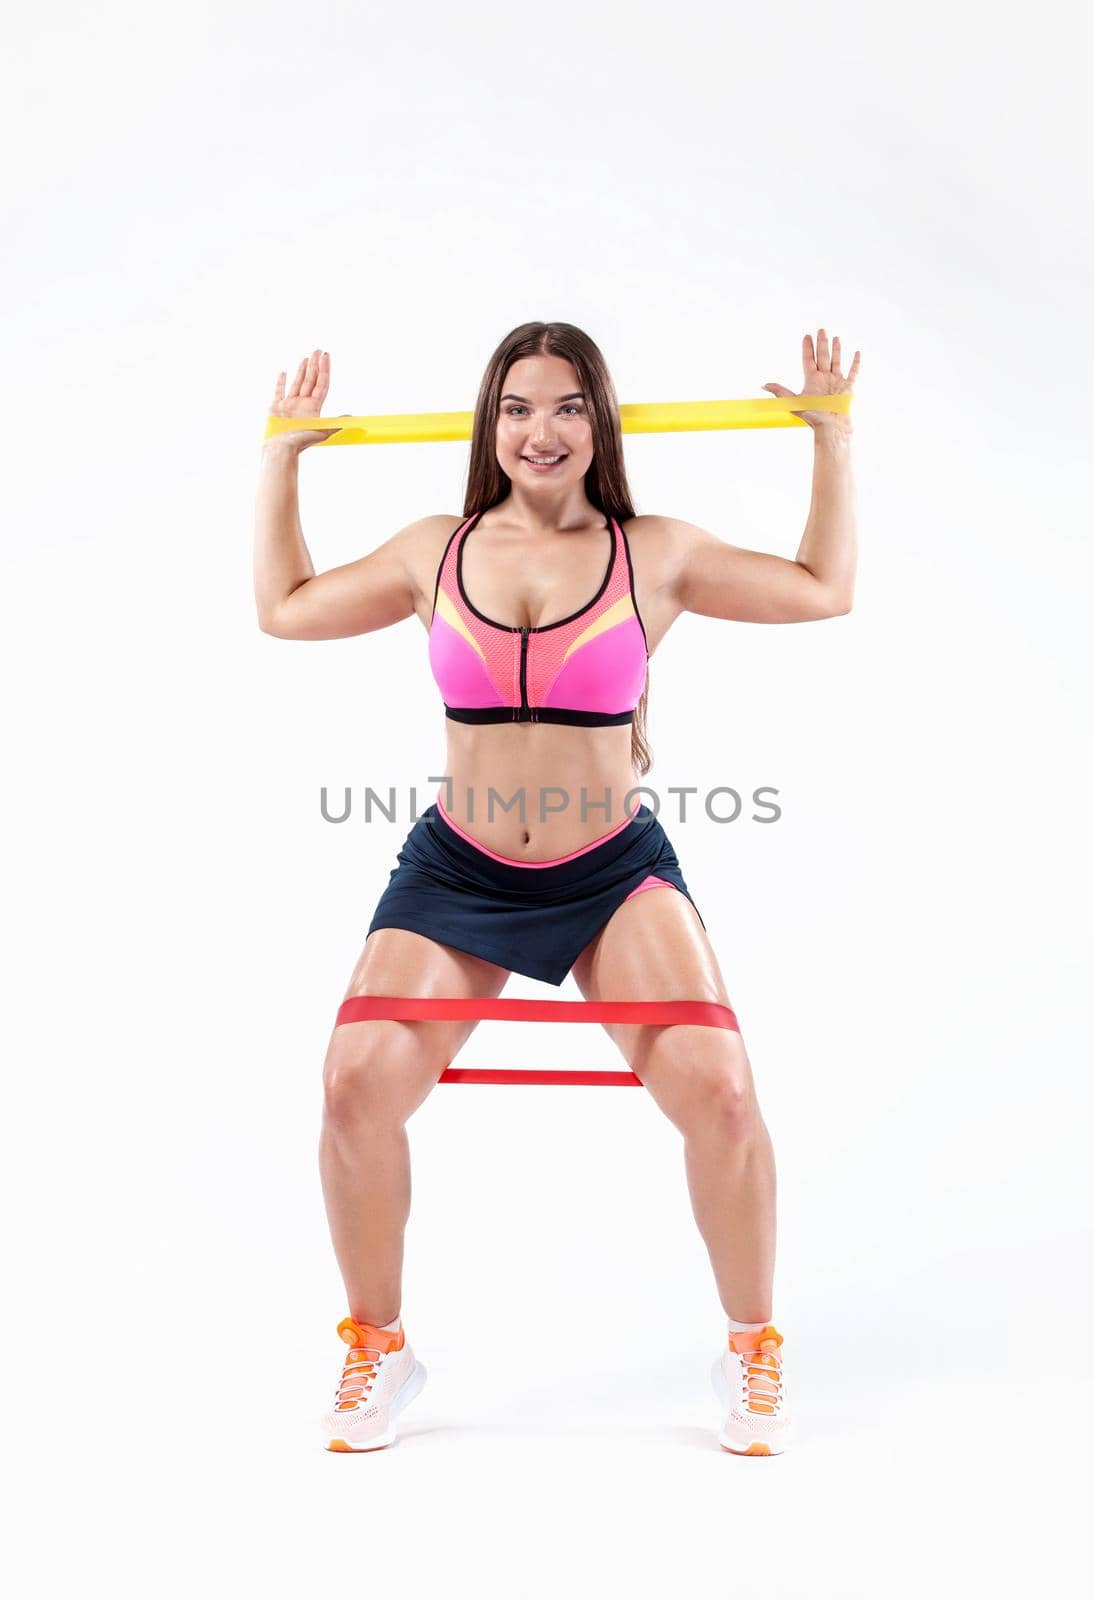 Size plus fitness woman athlete and bodybuilder holding expander or mini bands. Sport concept isolated on white background. by MikeOrlov